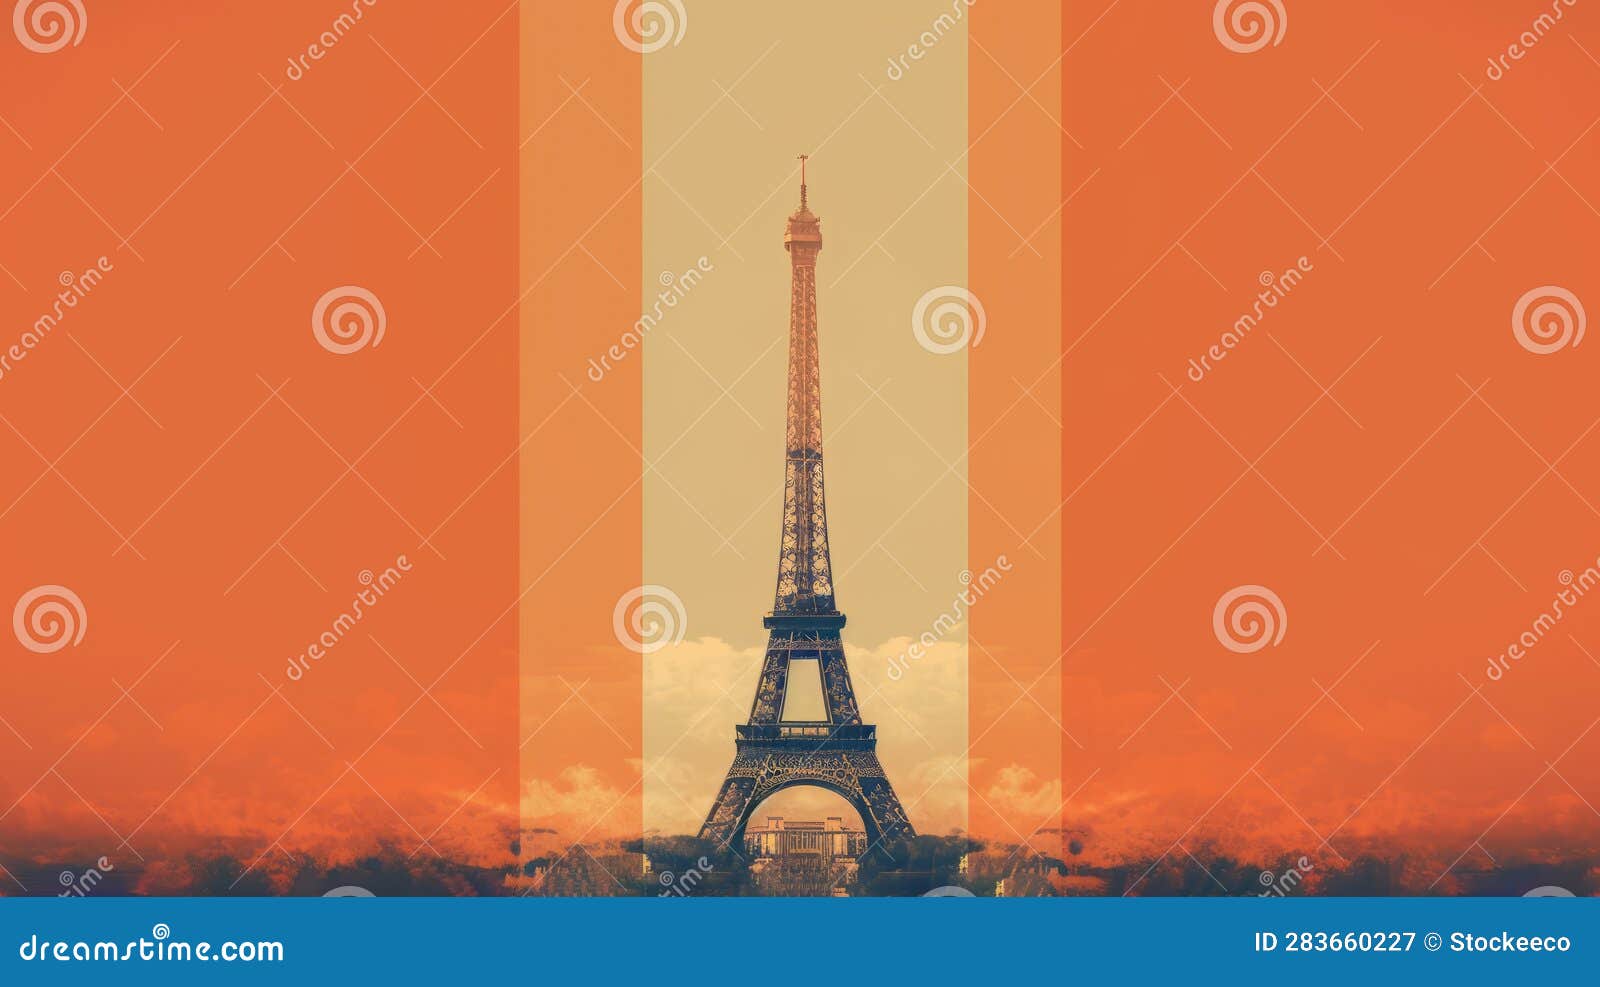 Effet Tower: A Parrot Orange Gradient Collage Of The Iconic Eiffel Tower. the paris eiffel tower wallpaper showcases a postmodernist collage with a unique blend of light orange and orange tones. this artistic design incorporates split toning, stripes, and shapes, reminiscent of ad posters. inspired by synthetism, the wallpaper features a captivating tonal palette that adds depth and vibrancy to any space. ai generated